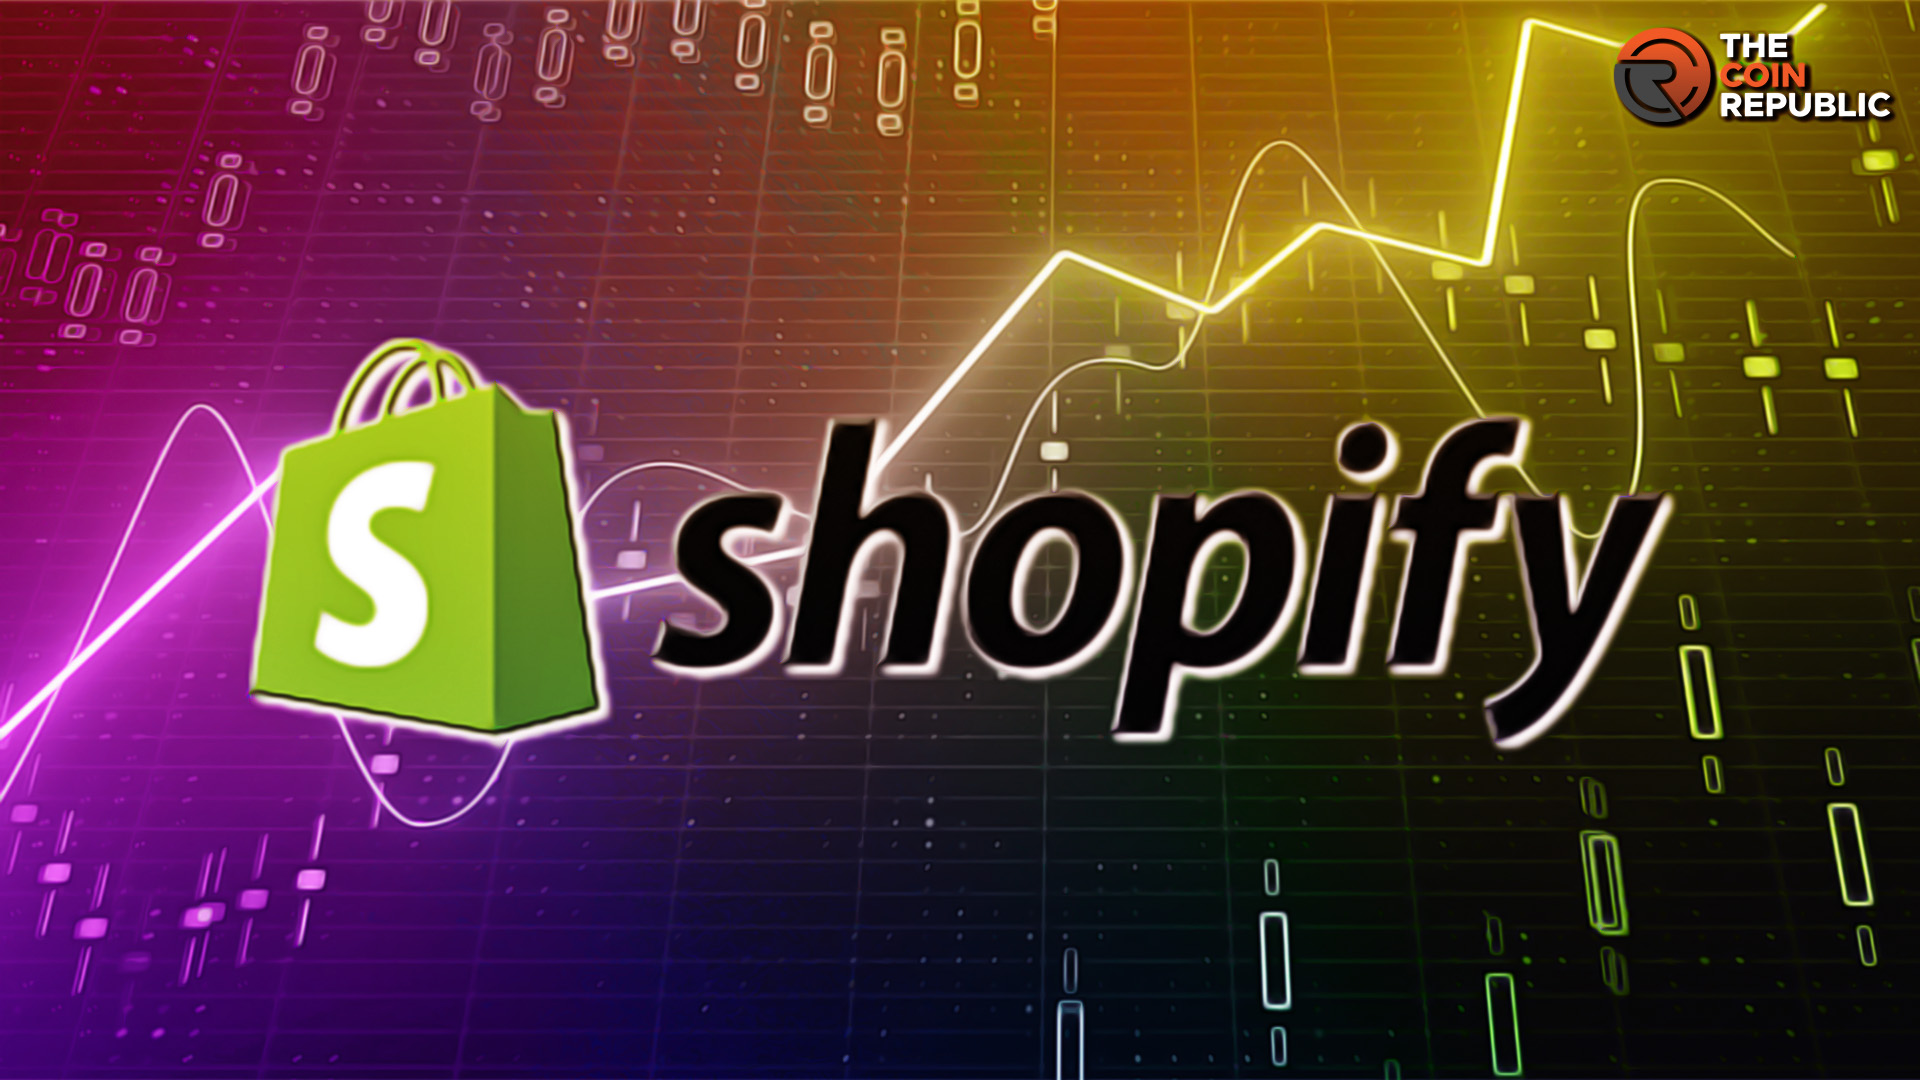 Shop Stock Price: Shopify Soars 26% After Third Quarter Sales